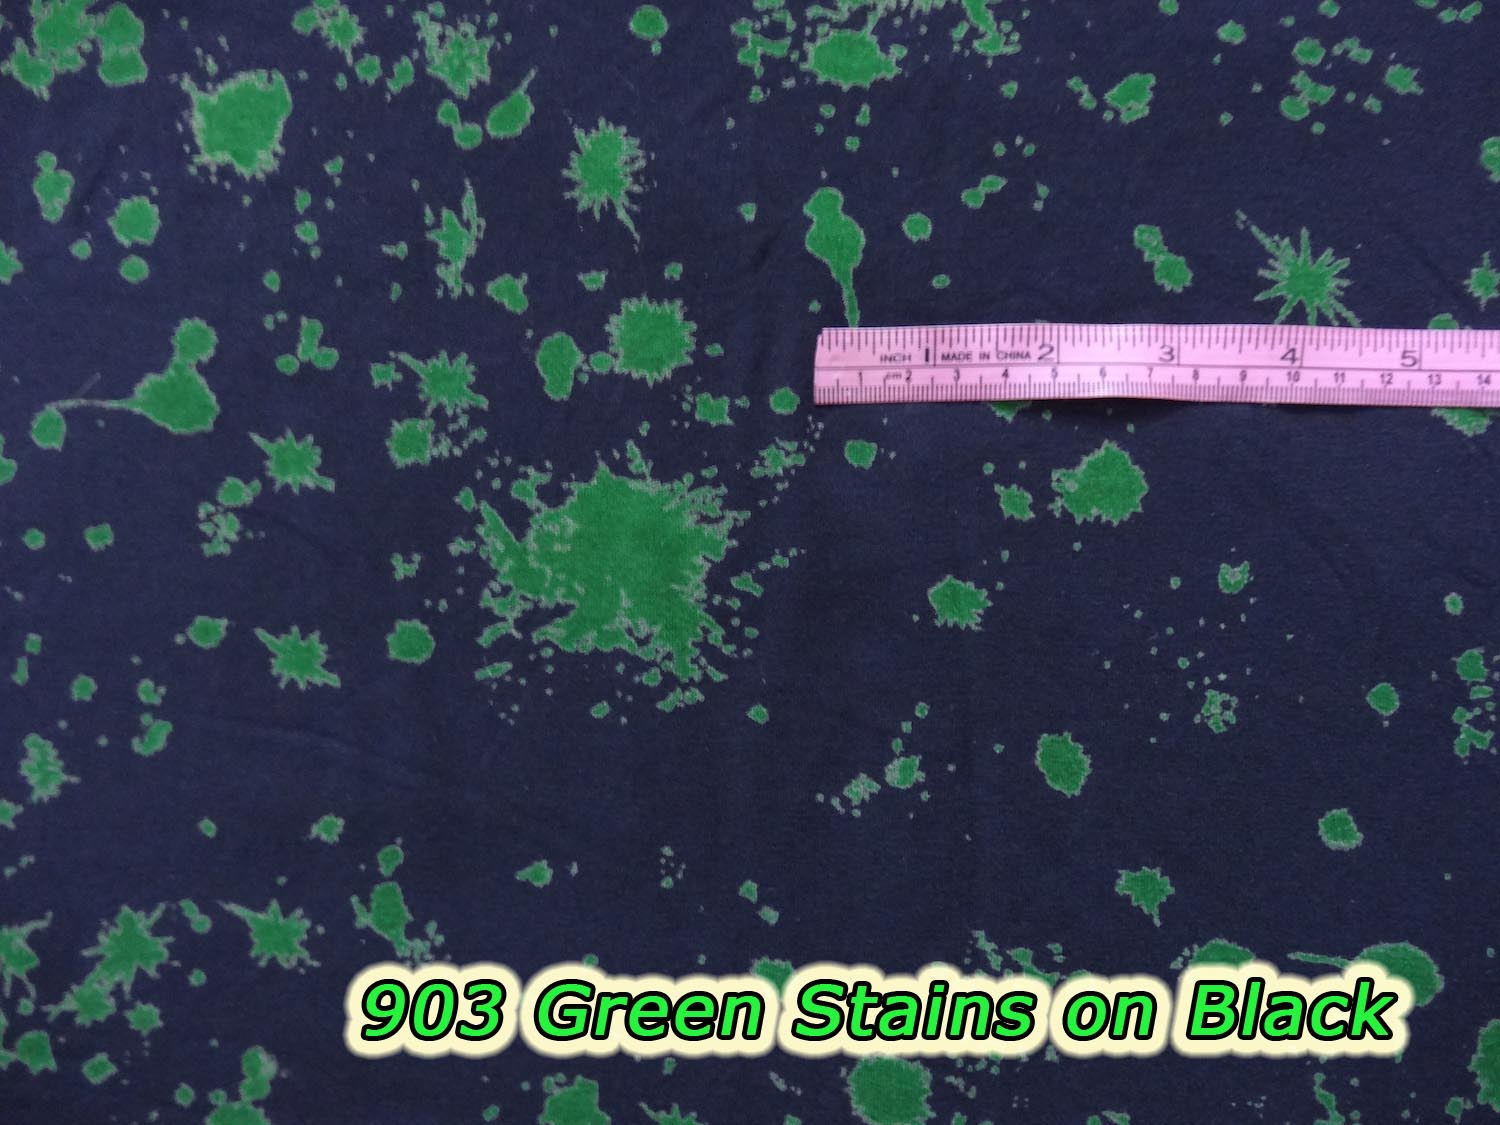 903 Green Stains on Black